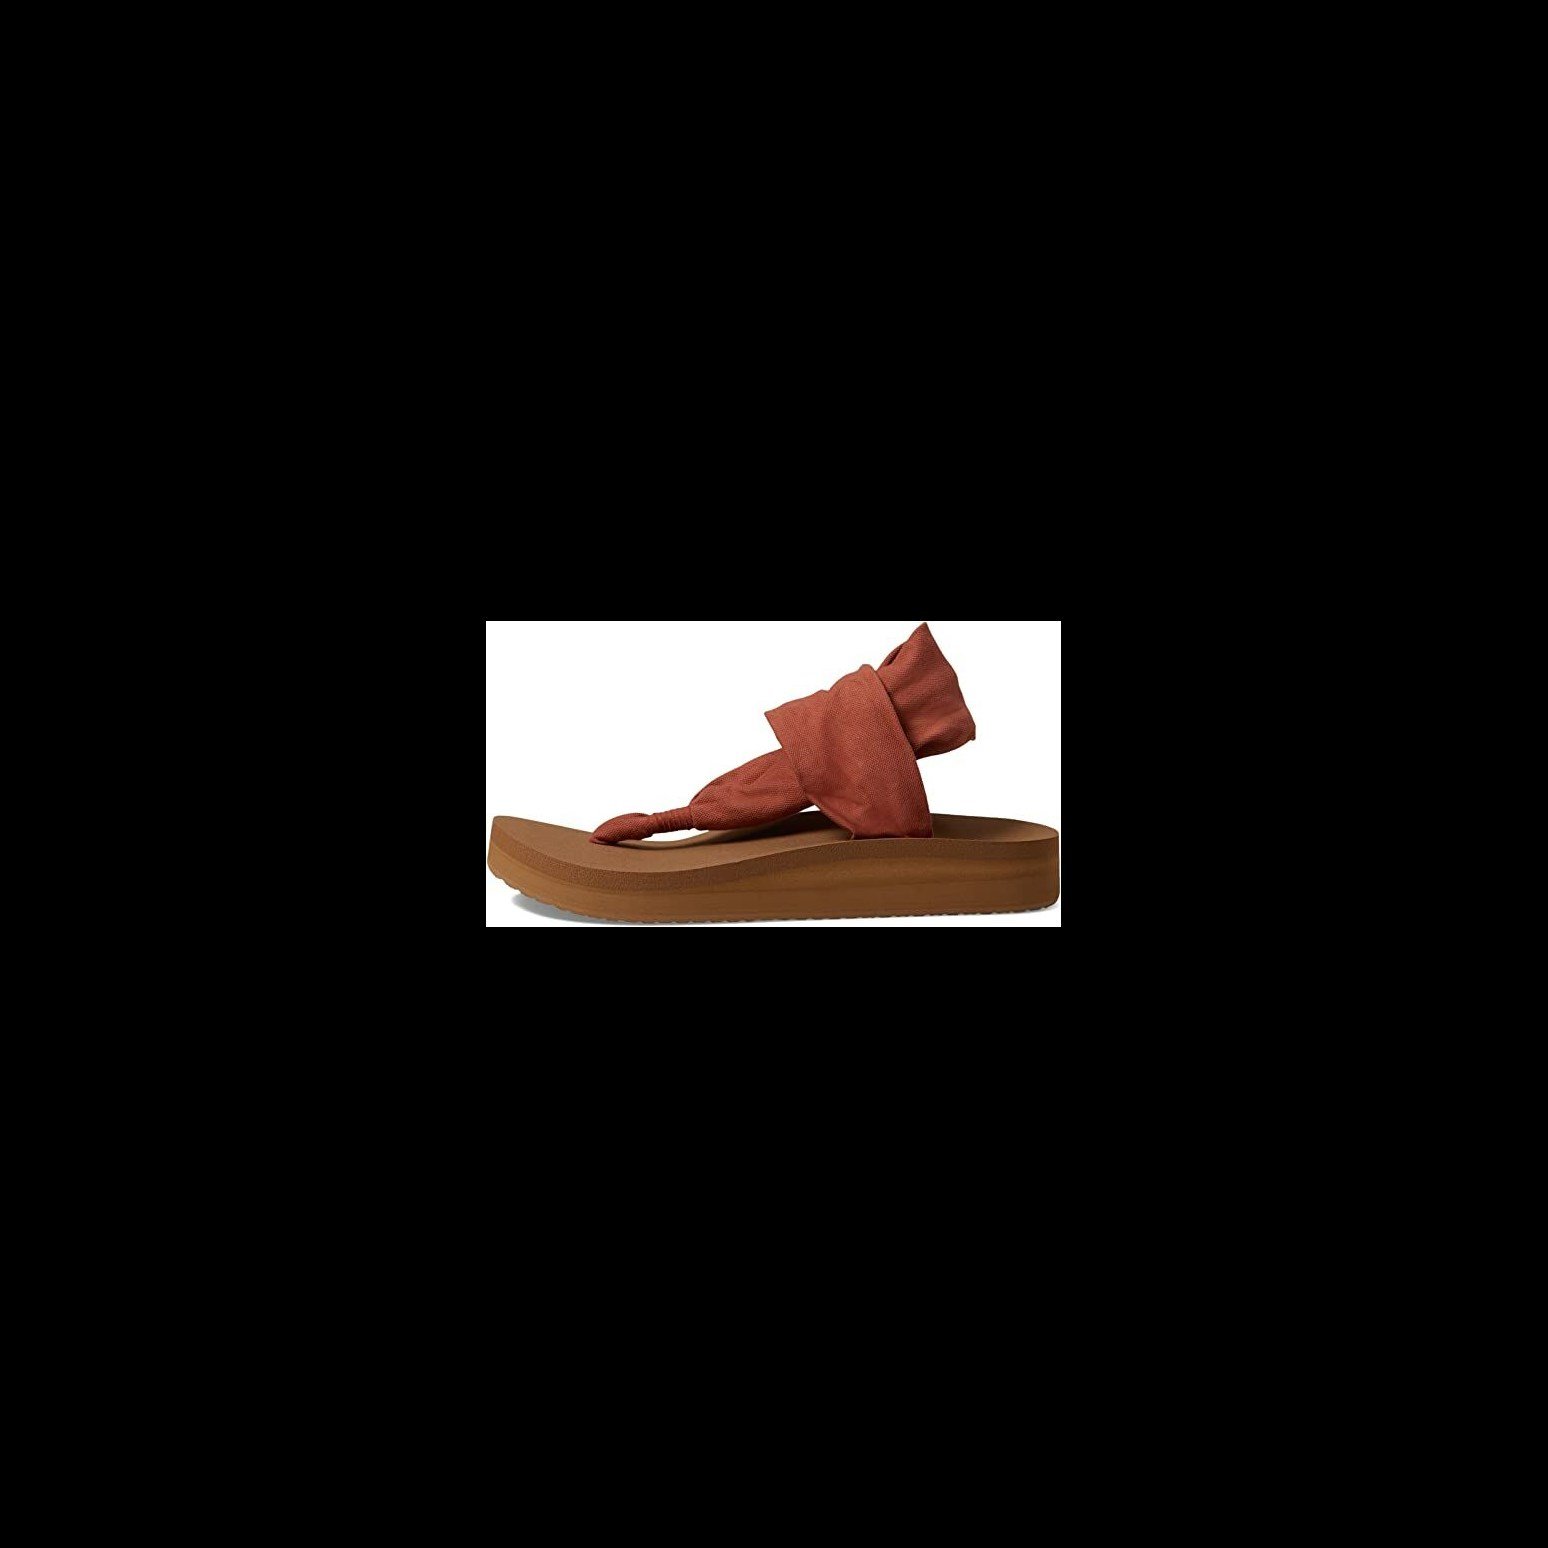 Women's Sling ST Midform Sandal in Baked Clay - Sandals